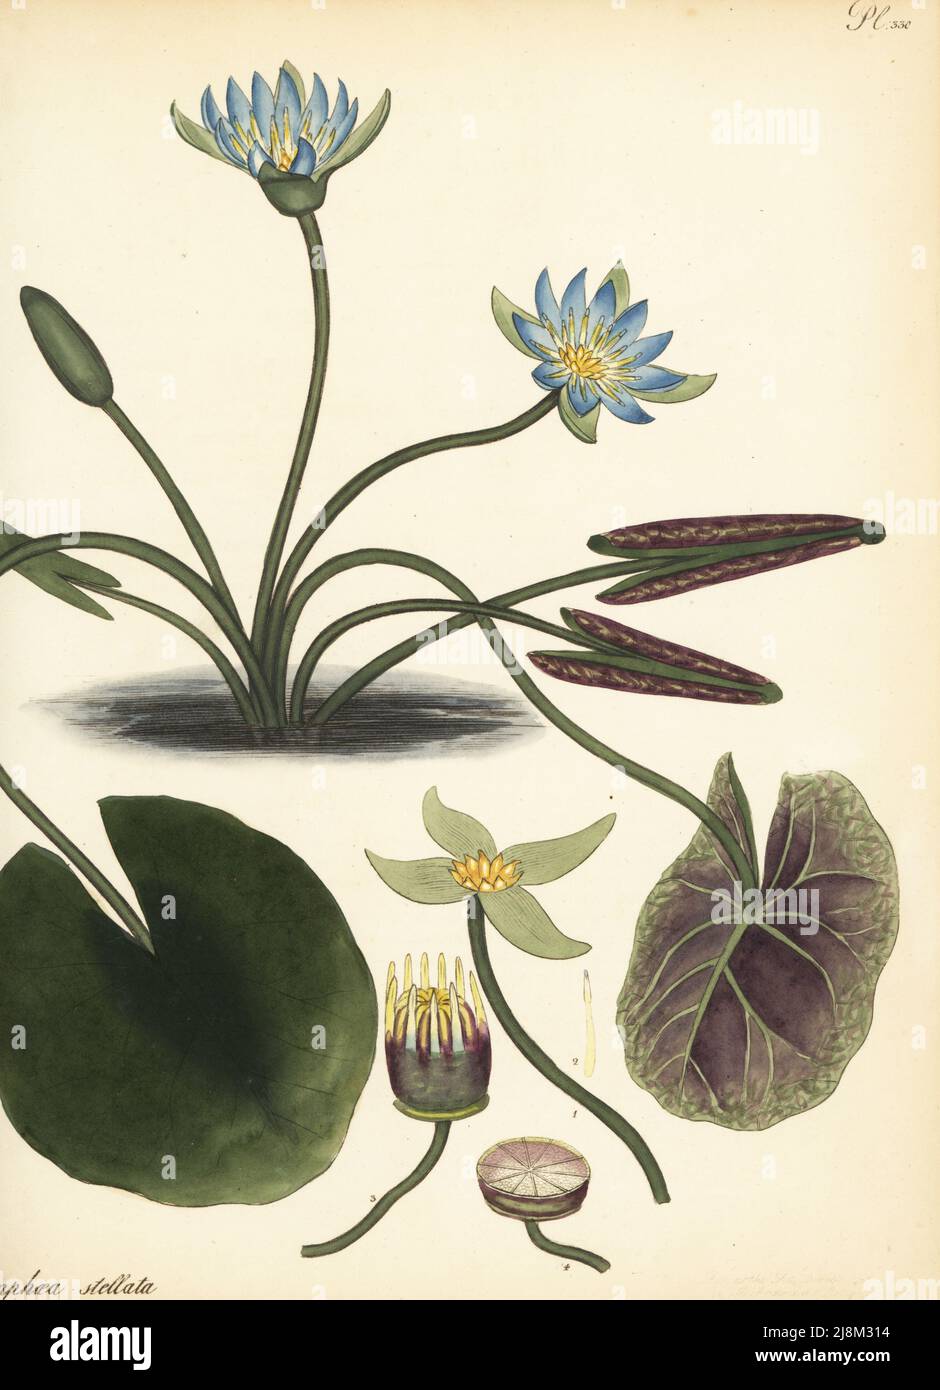 Blue lotus, Nymphaea nouchali var. nouchali Starr'd water-lily, Nymphaea stellata. From the East Indies on the Malabar coast, in the James Vere collection, Kensington Gore. Copperplate engraving drawn, engraved and hand-coloured by Henry Andrews from his Botanical Register, Volume 5, self-published in Knightsbridge, London, 1803. Stock Photo